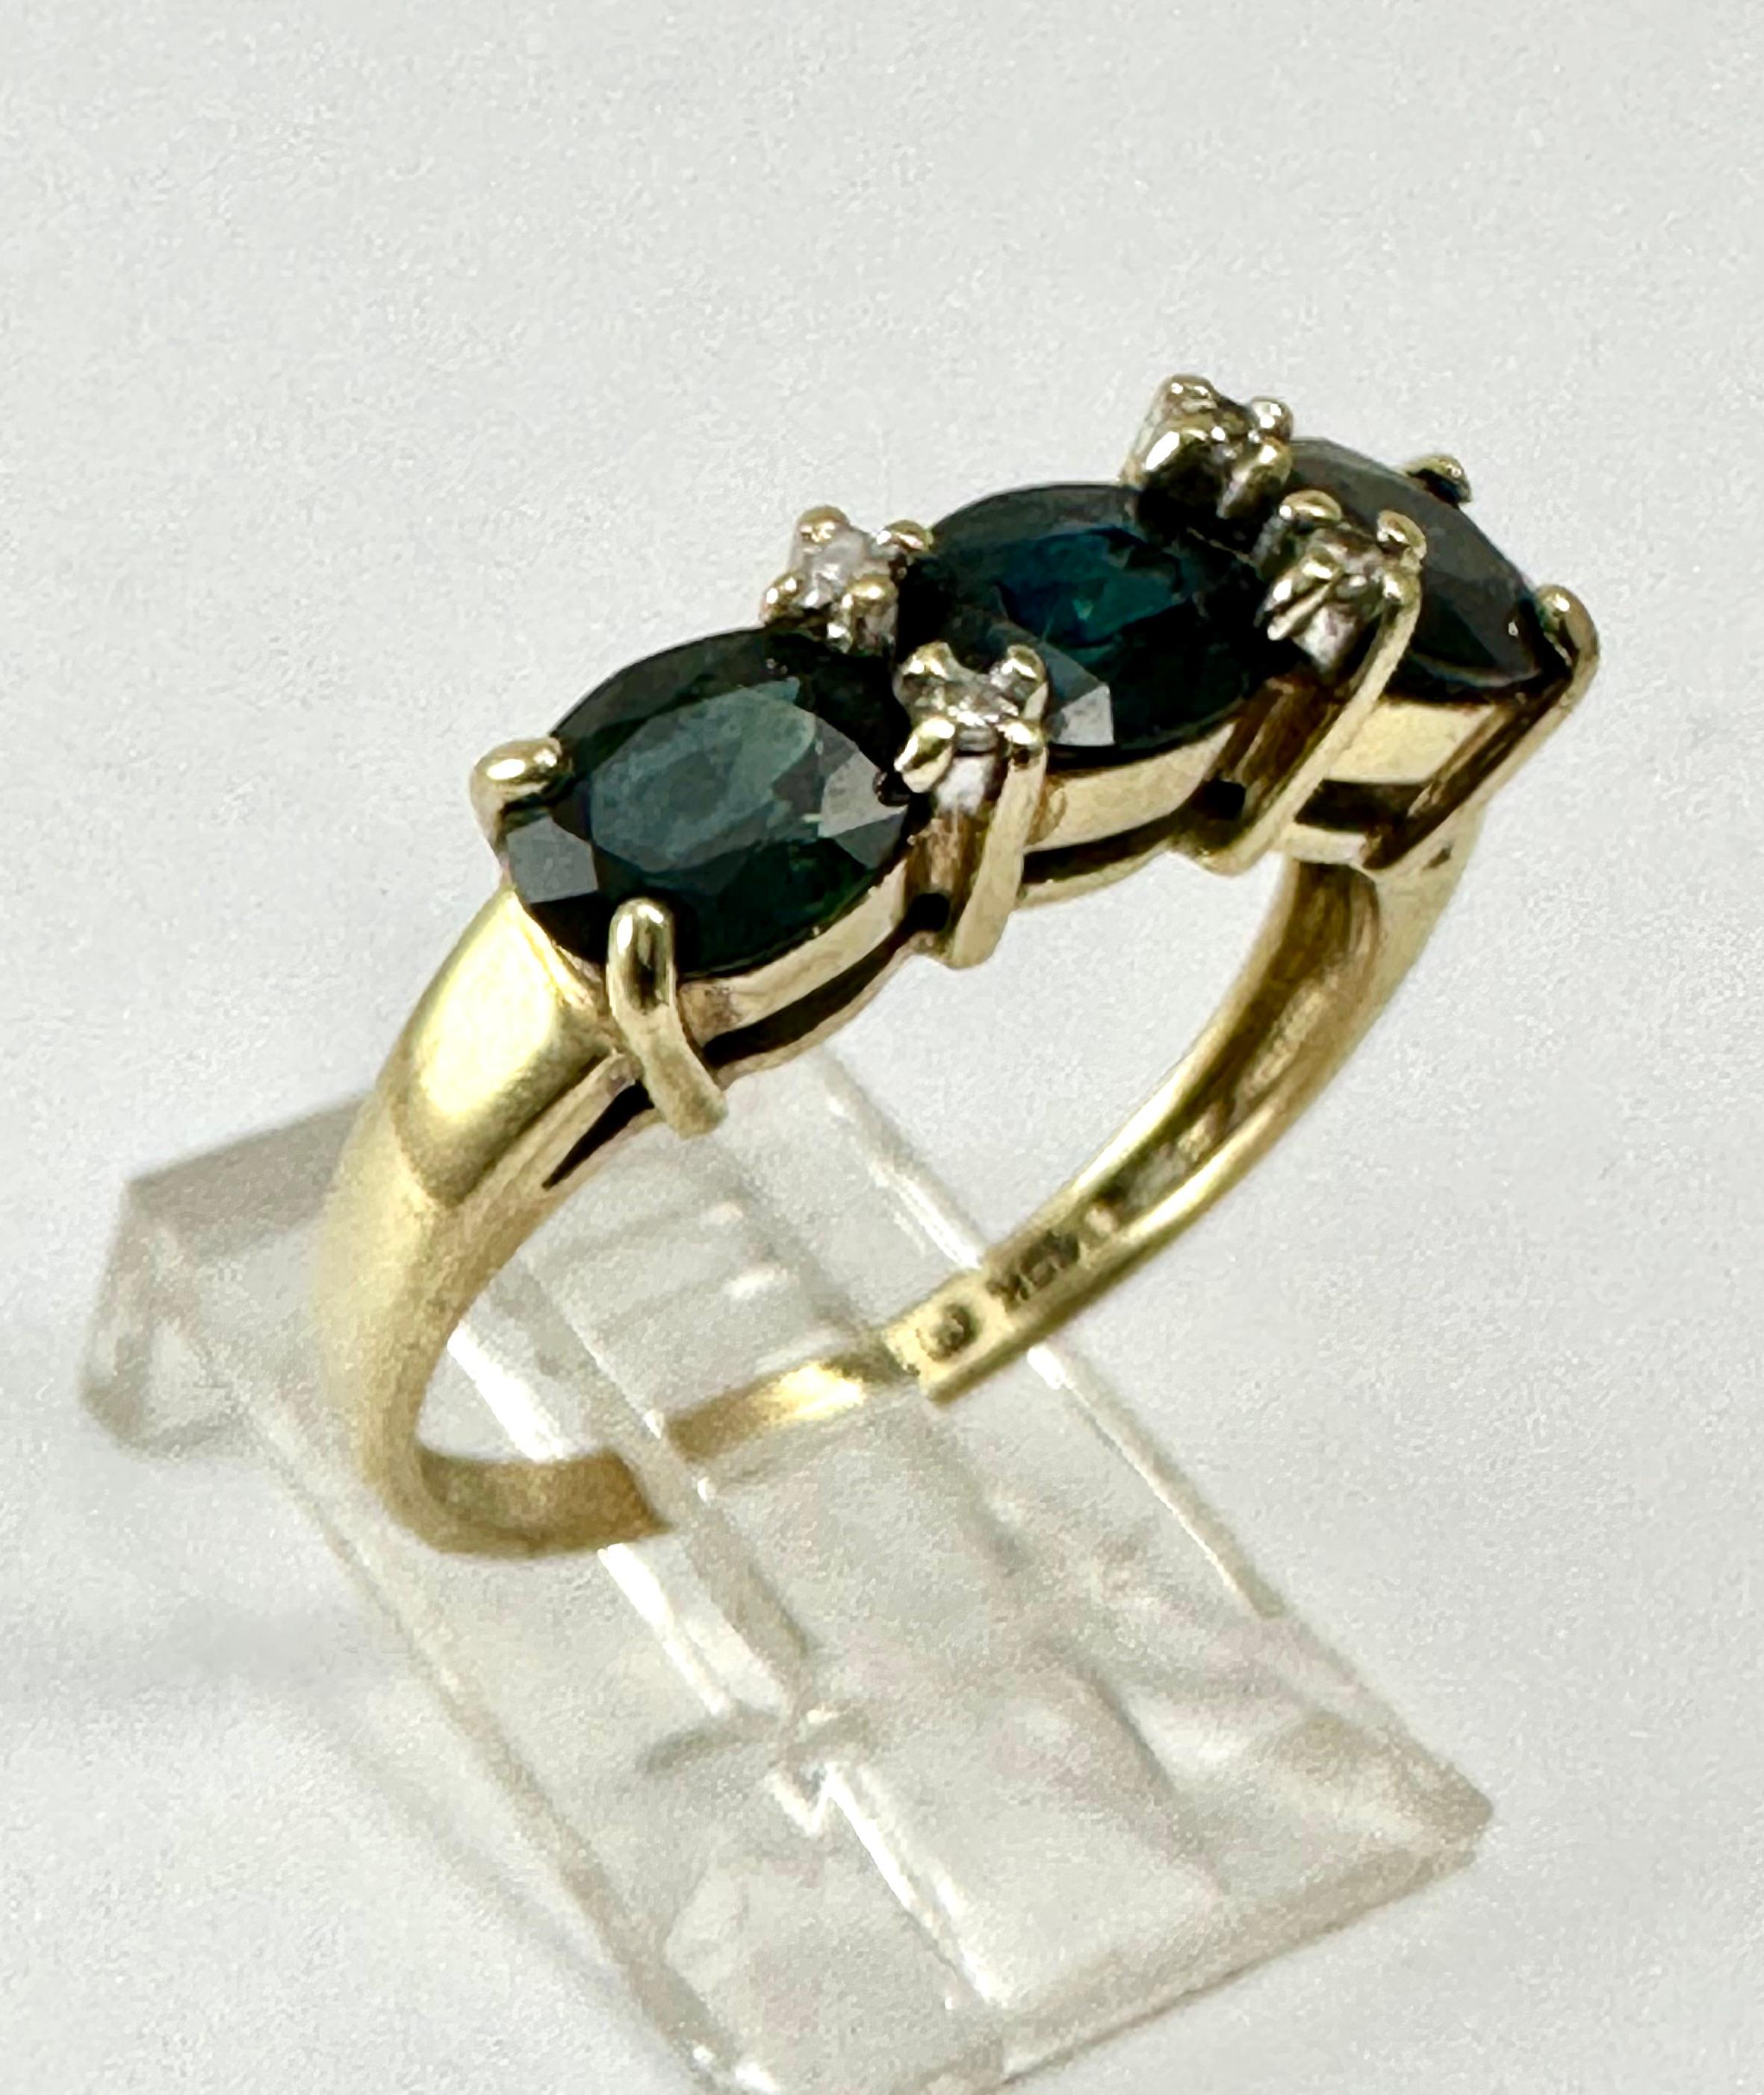 10k Yellow Gold ~ 5.2 Wide ~ Sapphire and Diamond ~ Band ~ Ring ~ Size 7
Oval sapphires measure approx. 4.5mm x 6mm

Meaning: Sapphire is a stone of wisdom and royalty, often associated with sacred things and considered the gem of gems, guiding